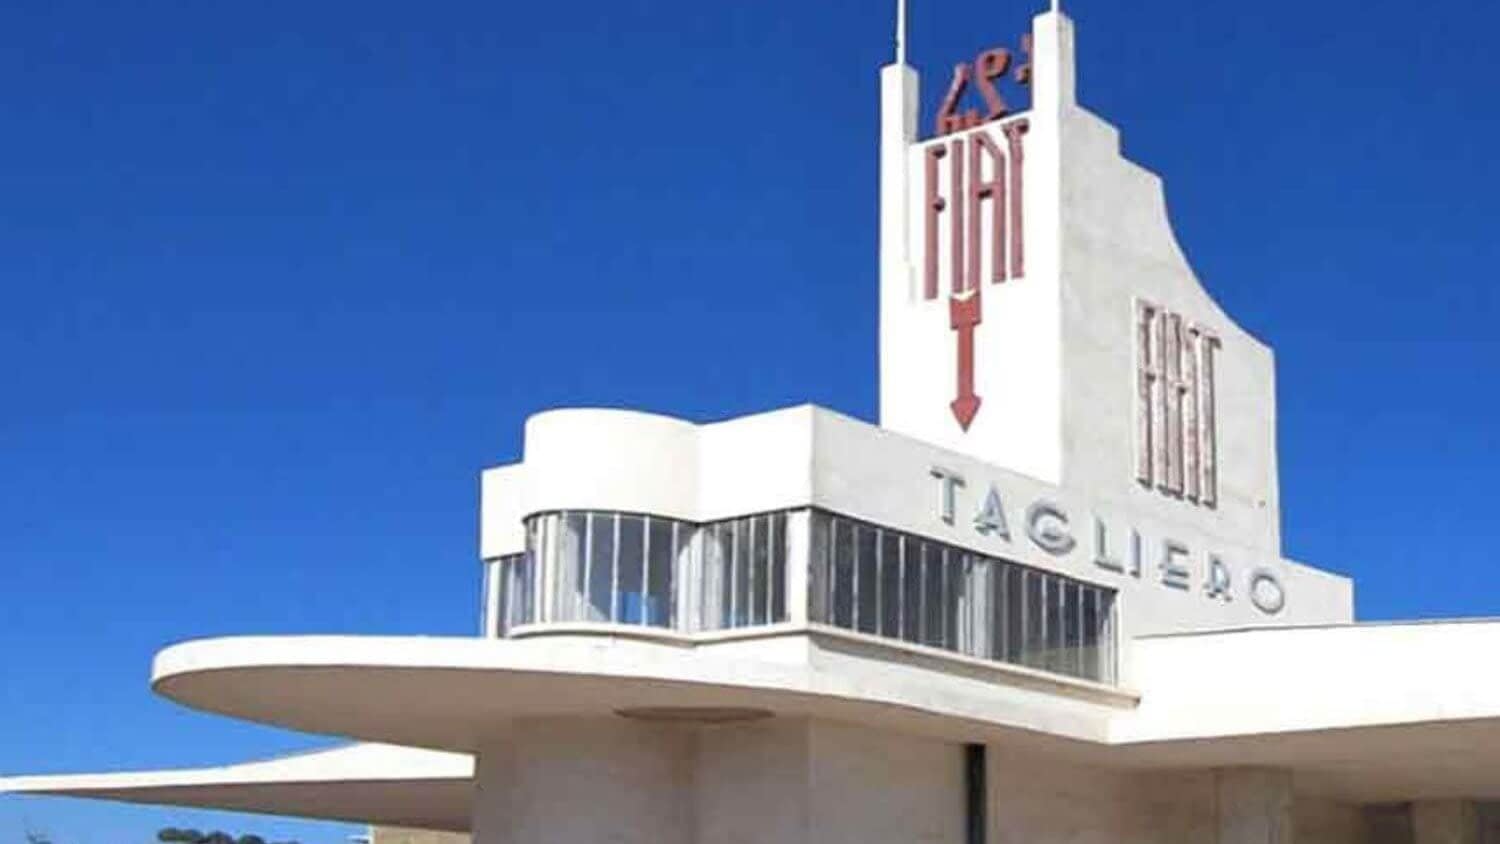 Fiat Tagliero Building - things to see and do in Eritrea